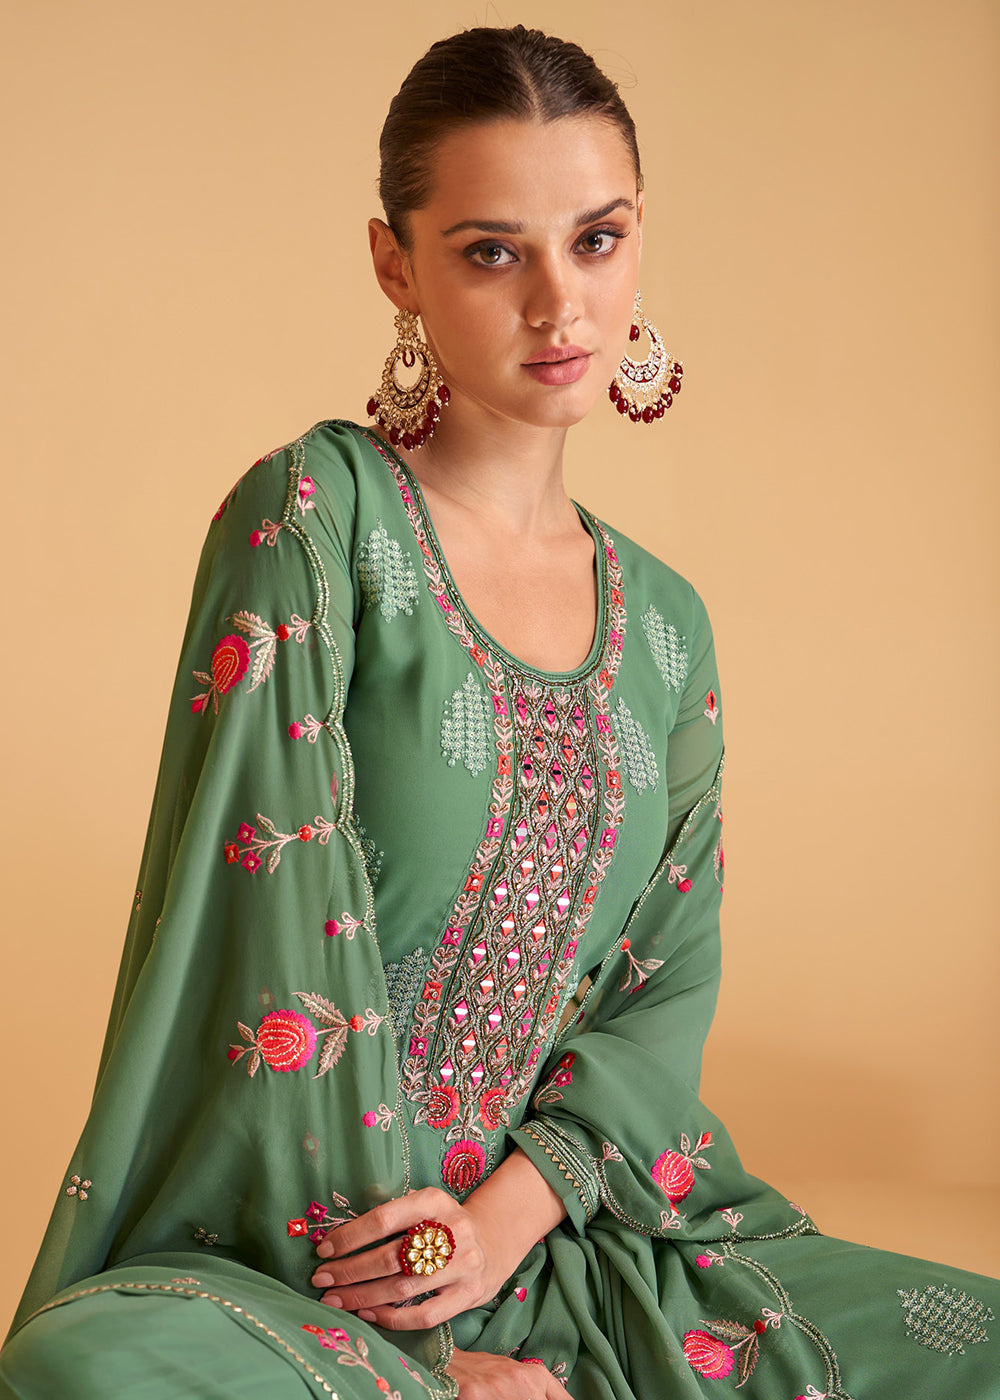 Buy Now Festive Look Green Floral Embroidered Palazzo Style Suit Online in USA, UK, Canada, Germany, Australia & Worldwide at Empress Clothing.